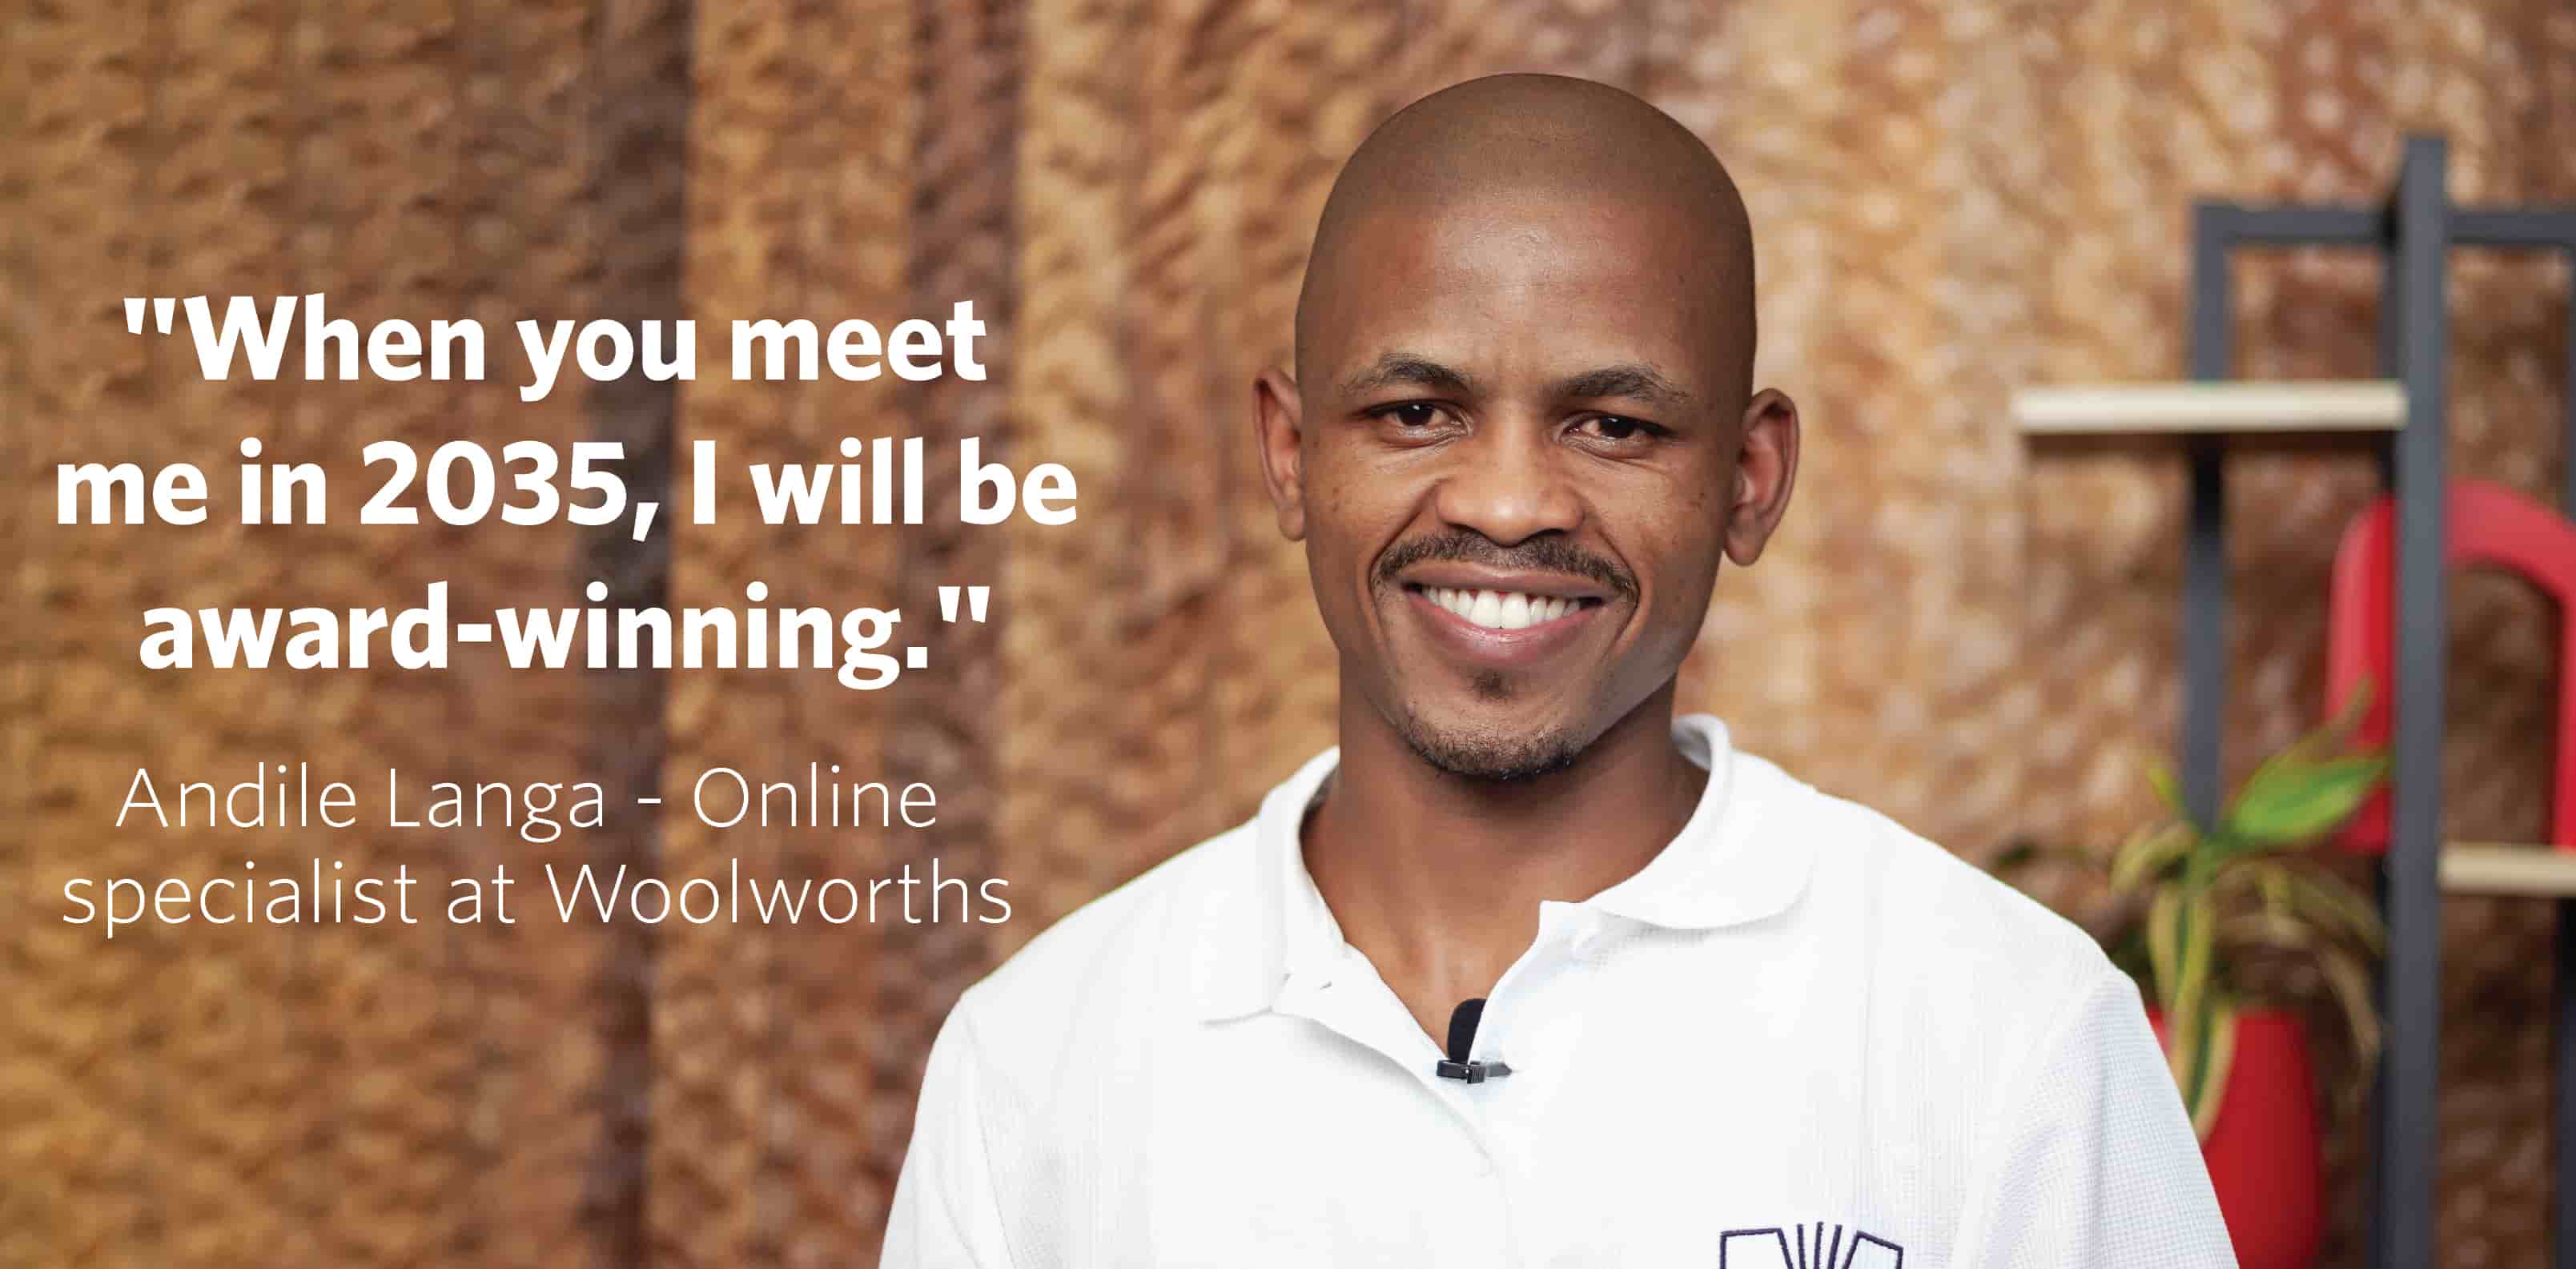 Andile Langa , an online specialist at Woolworths